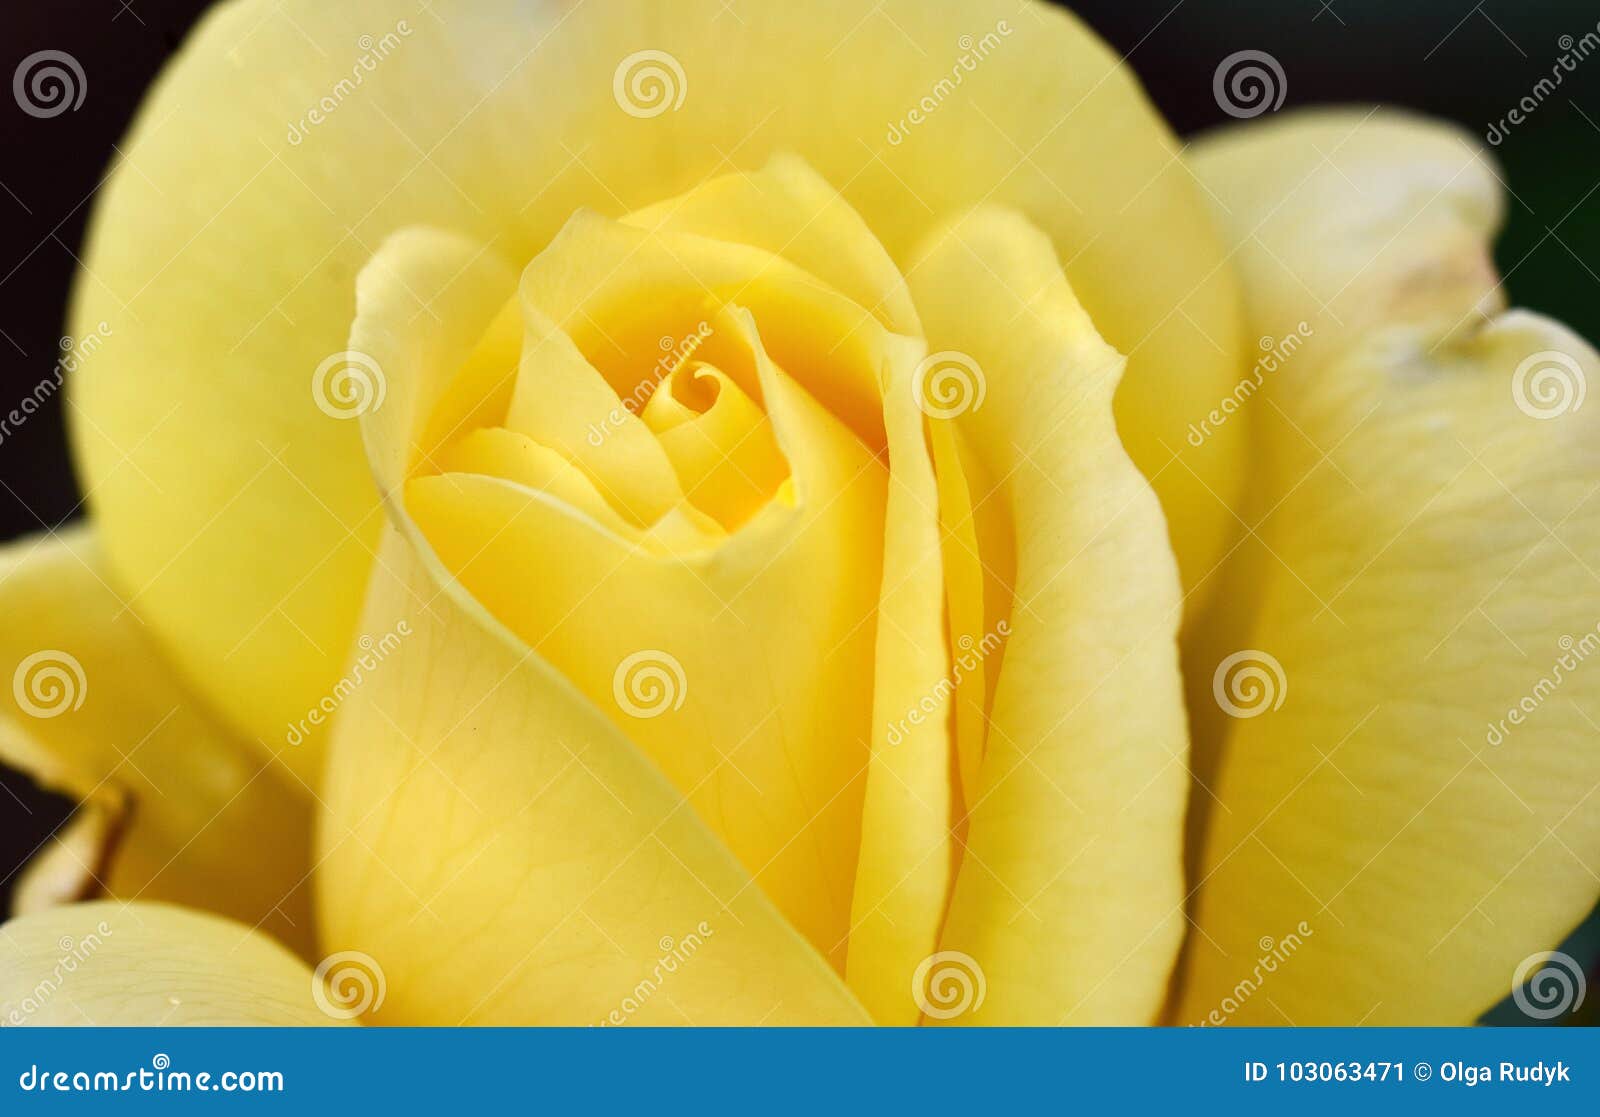 A Yellow Rose On A Black Background Stock Image - Image of beauty